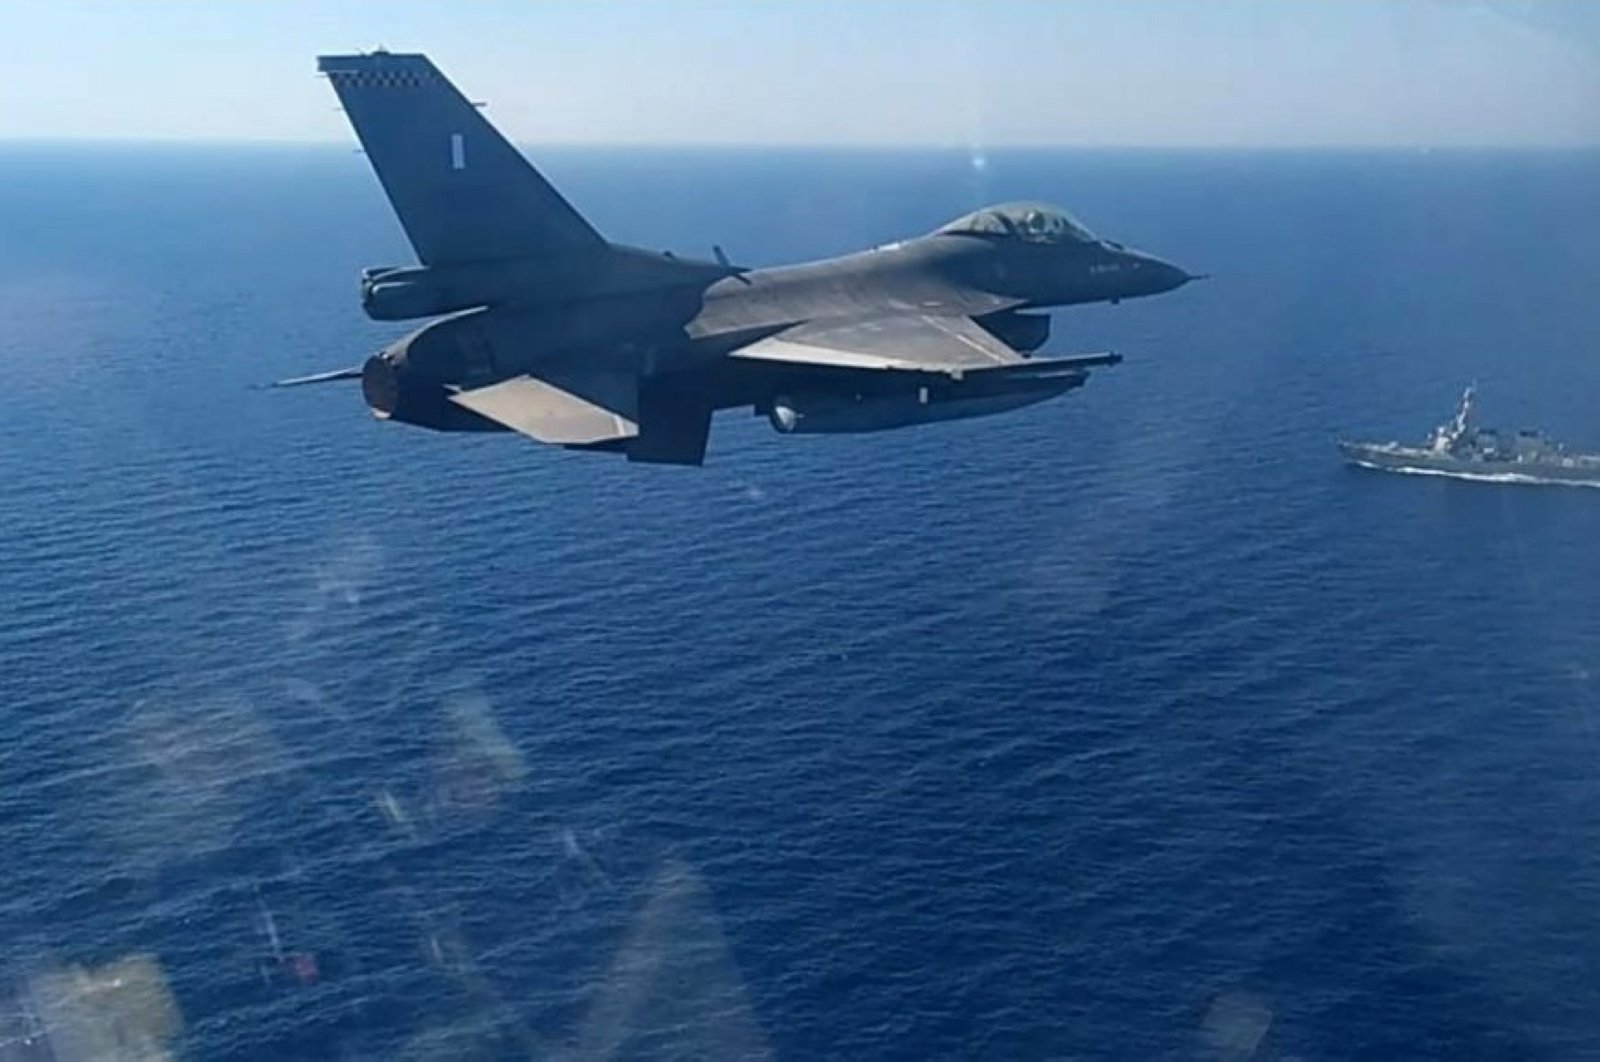 In this photo provided by the Greek Defense Ministry, a Greek air force jet takes part in a Greek-U.S. military exercise south of the island of Crete, Aug. 24, 2020 (Greek Defense Ministry via AP)